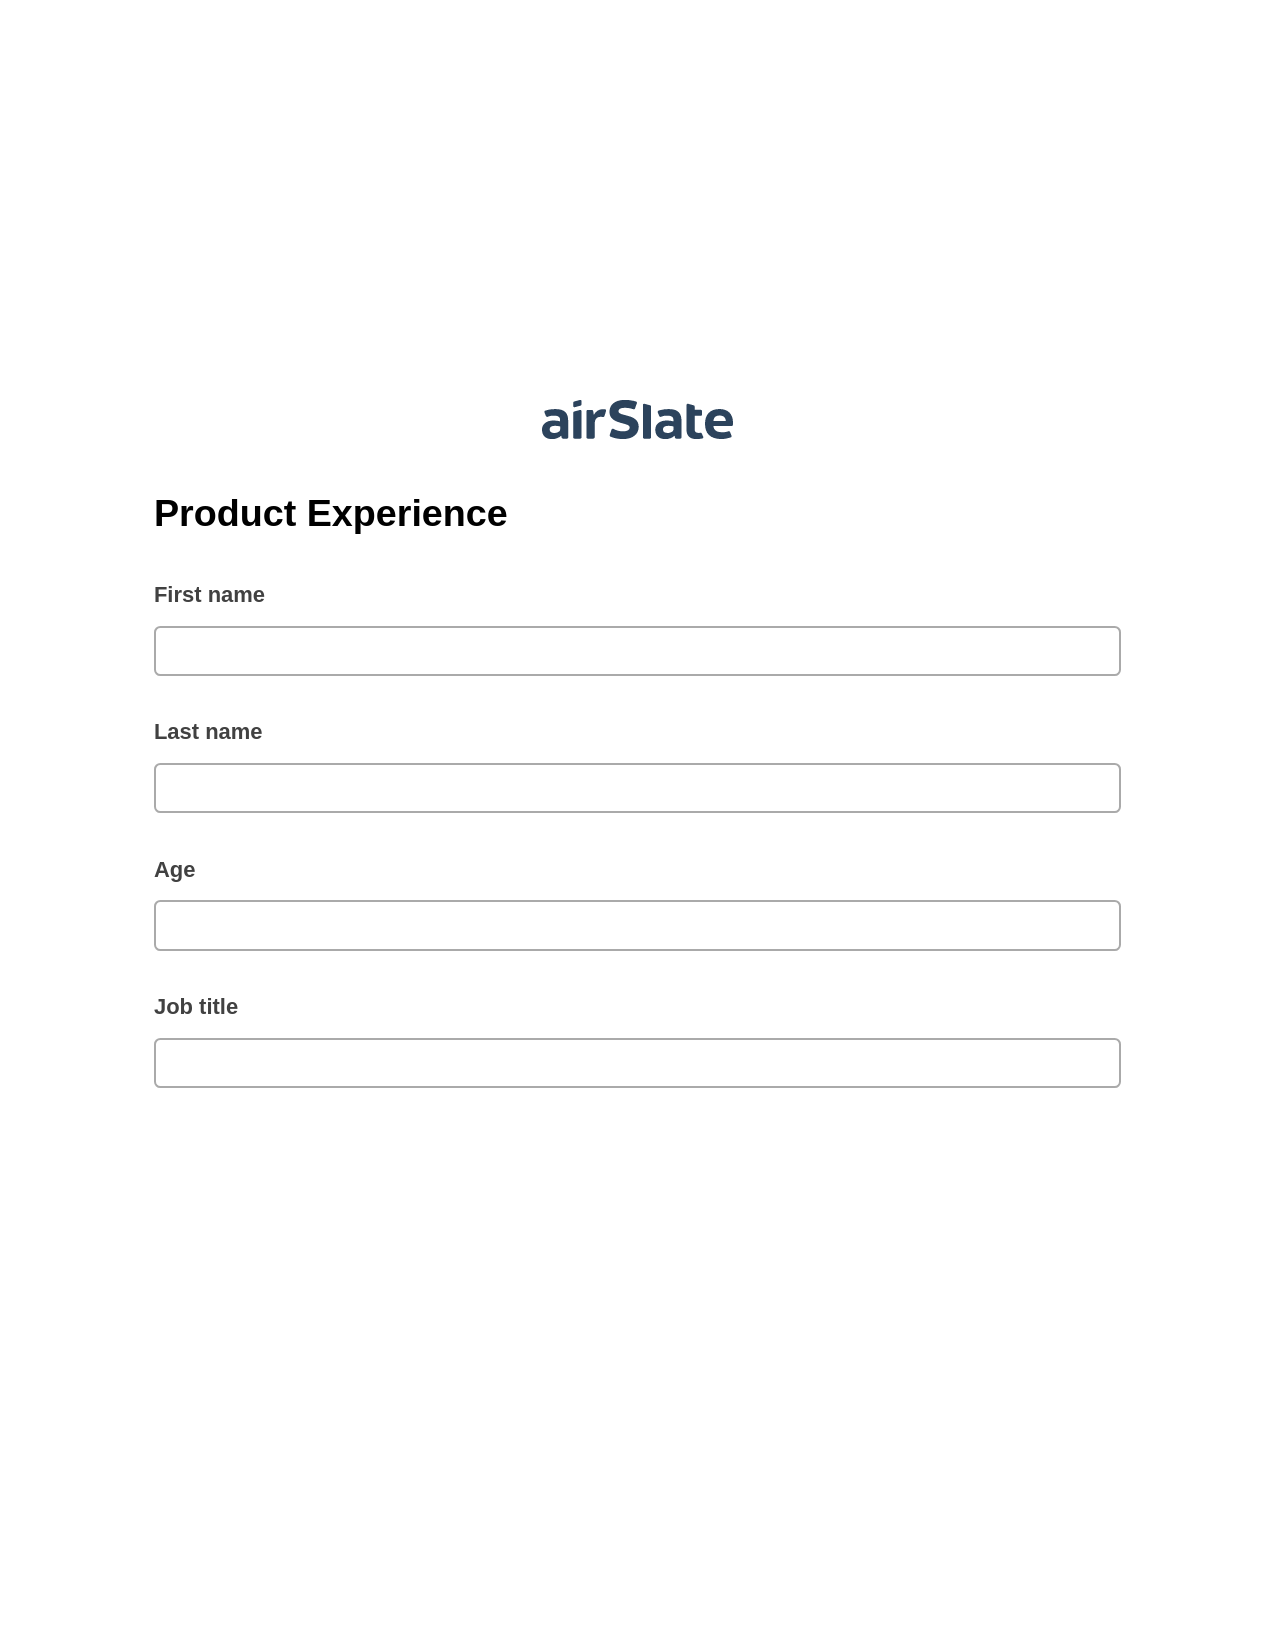 Product Experience Pre-fill from MS Dynamics 365 Records, Google Cloud Print Bot, Export to NetSuite Bot